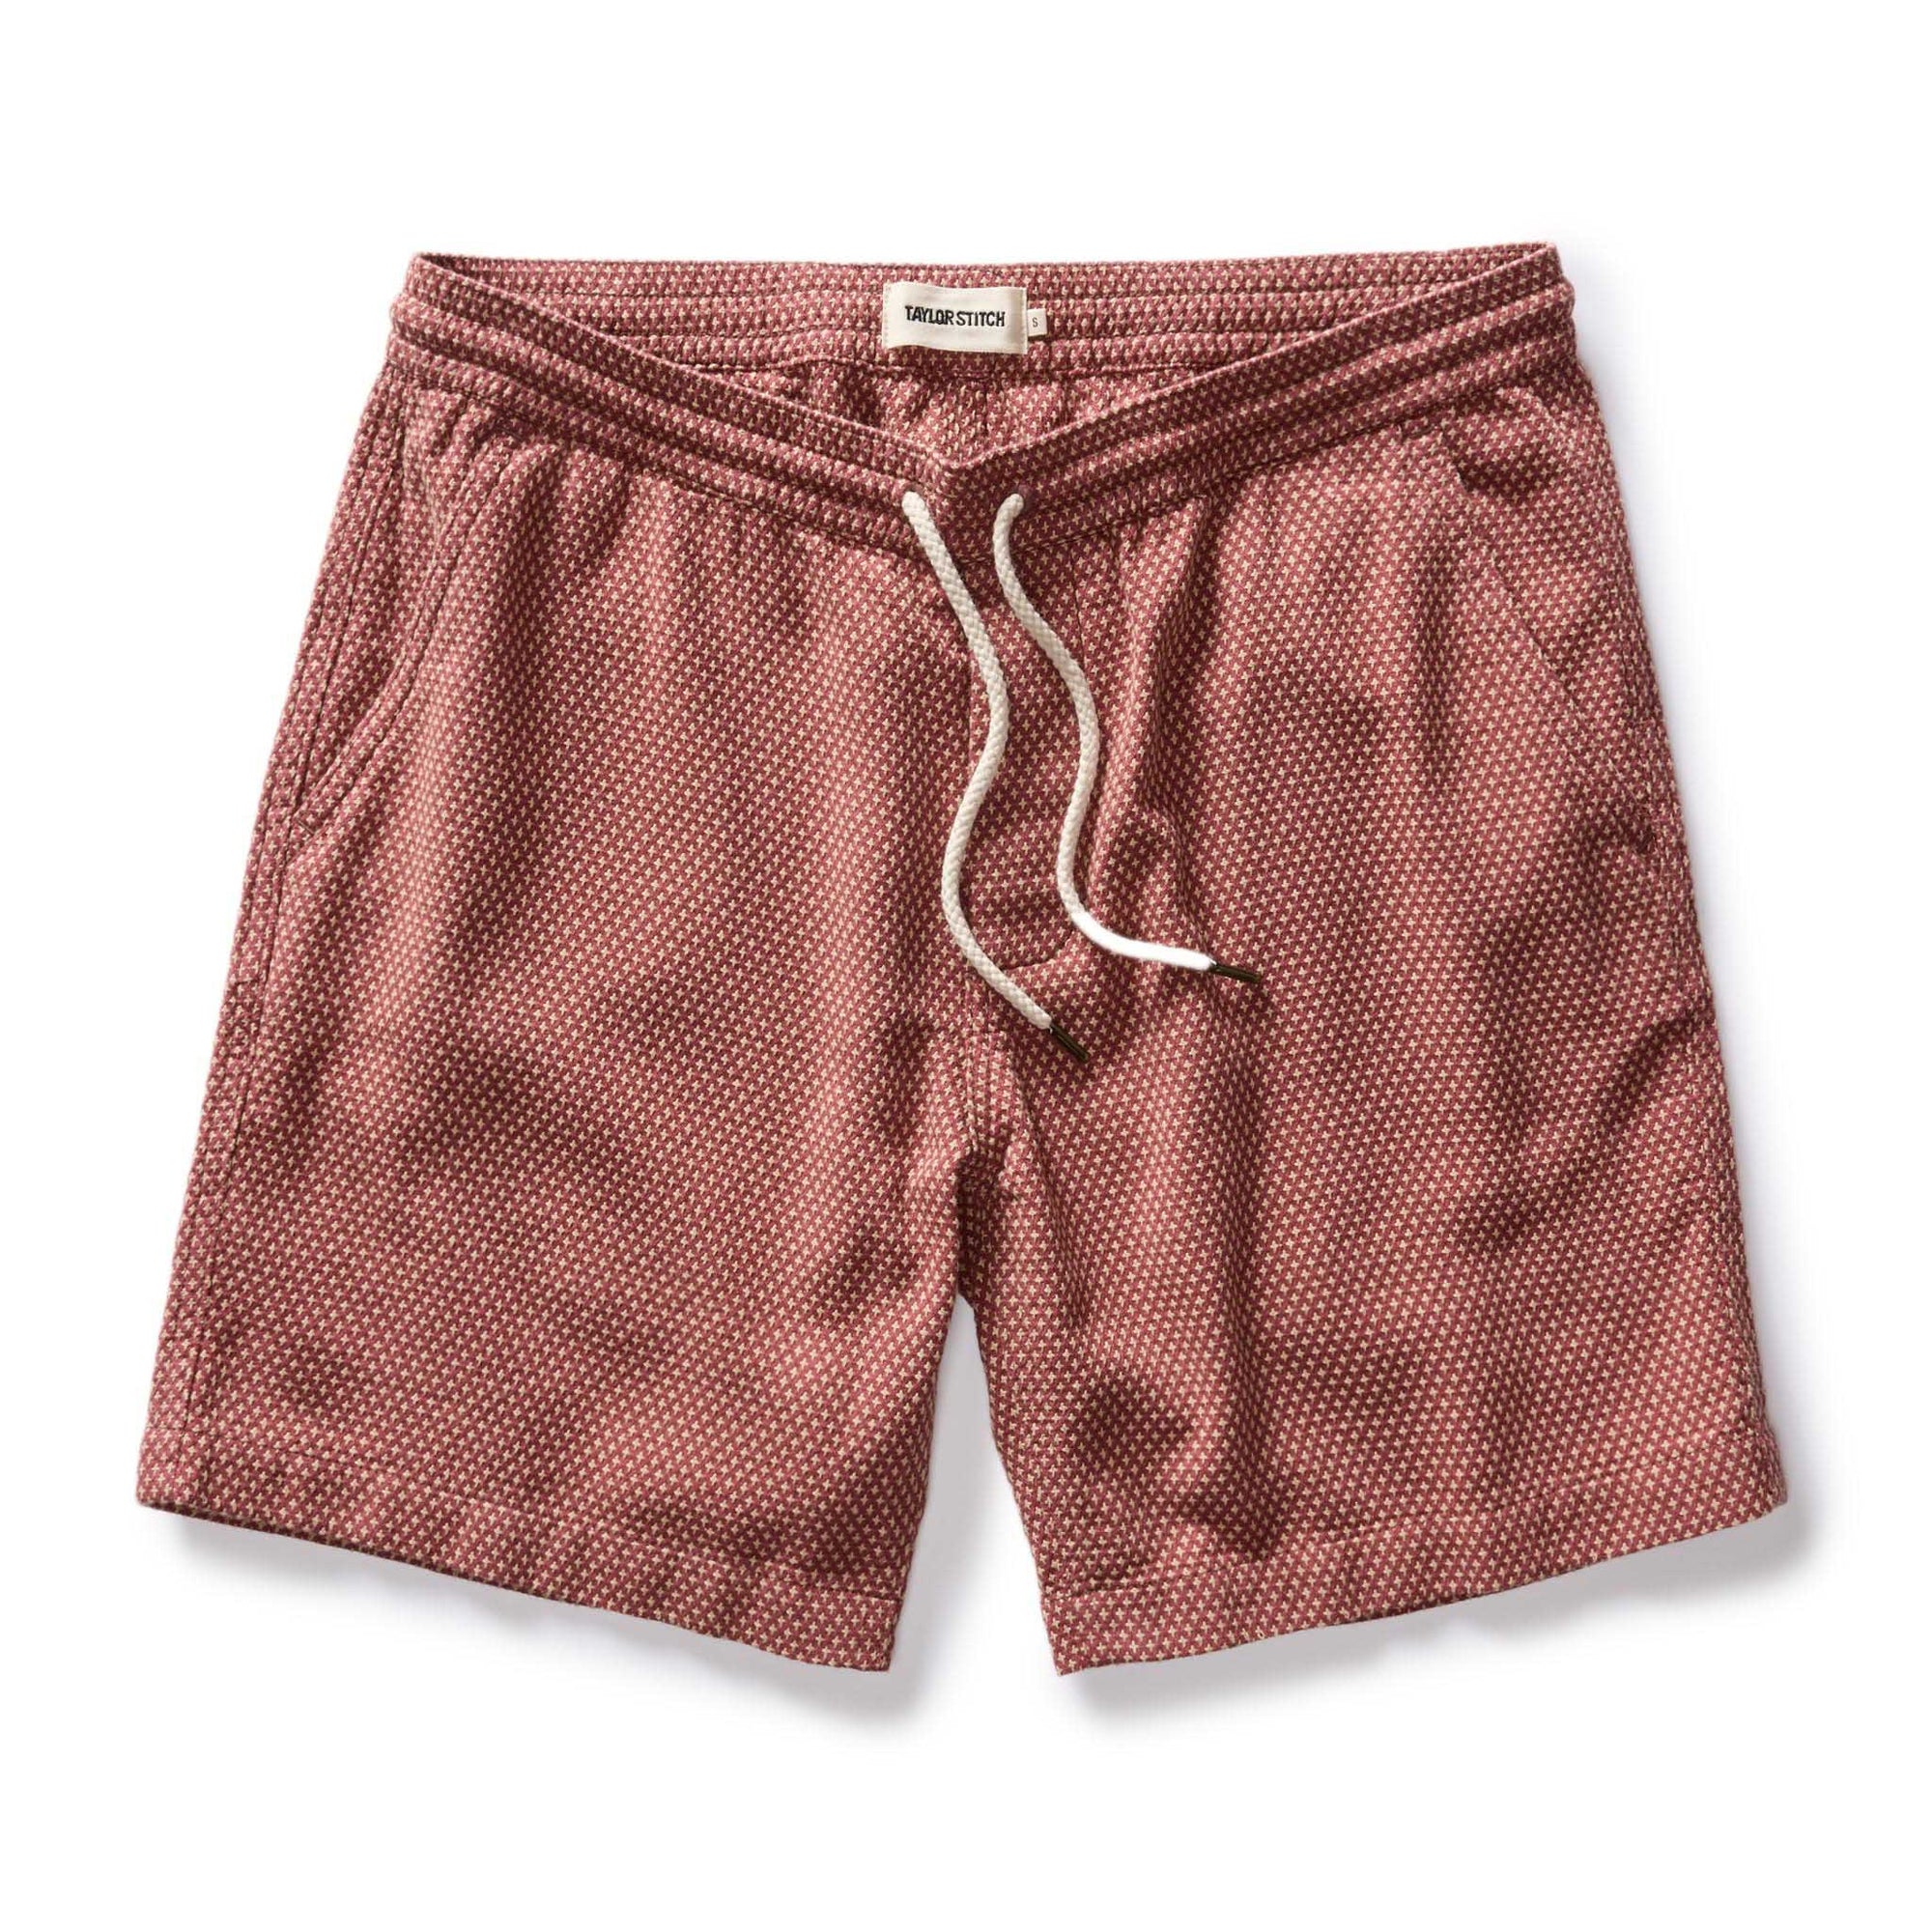 Taylor Stitch - The Apres Short in Fired Brick Dobby